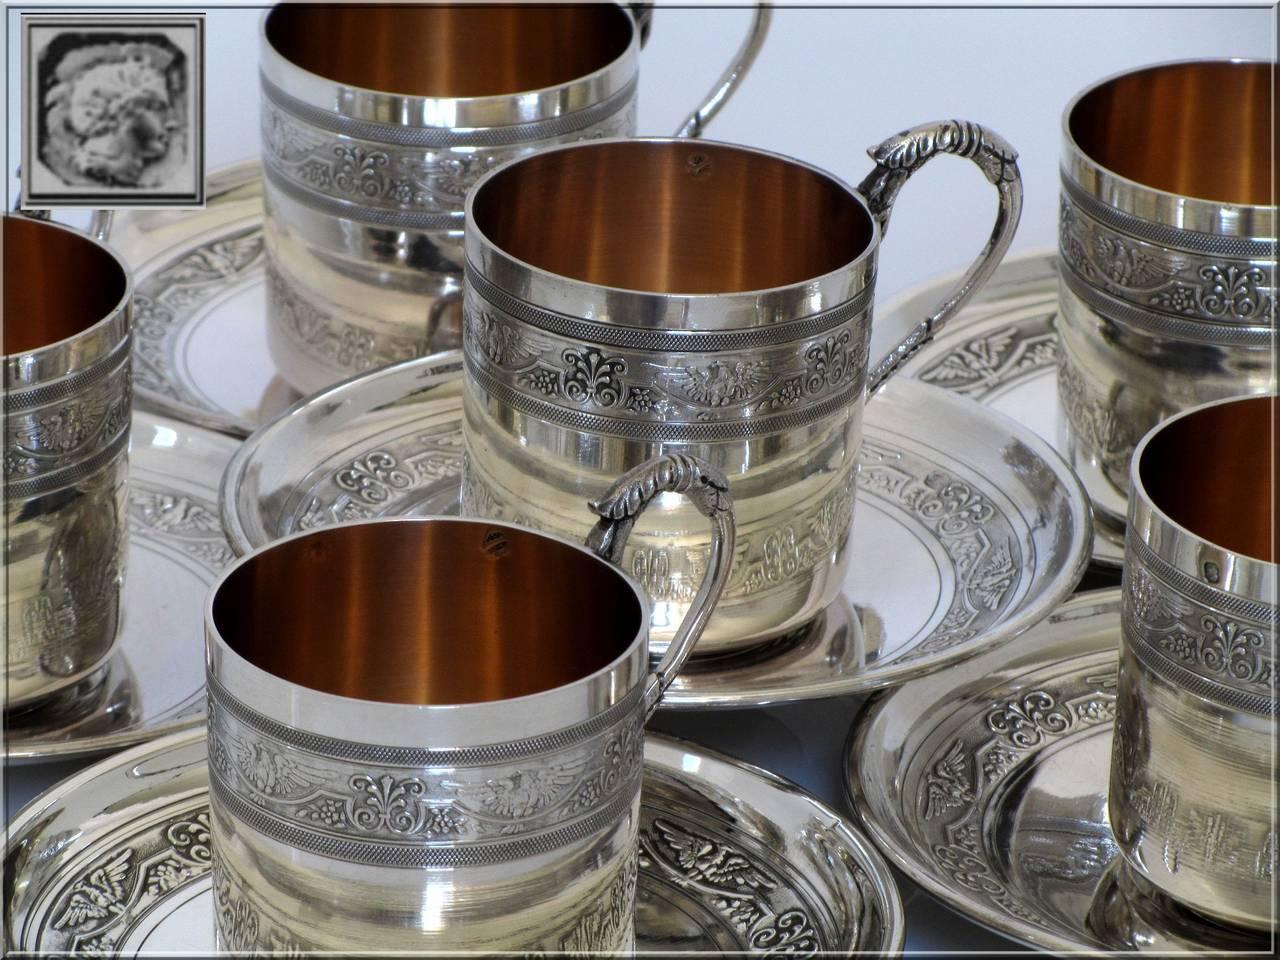 Molle Ornate French sterling silver 18-karat gold six coffee tea cups with saucers imperial eagles.

Head of Minerve 1 st titre for 950/1000 French sterling silver vermeil guarantee. The quality of the gold used to recover sterling silver is a